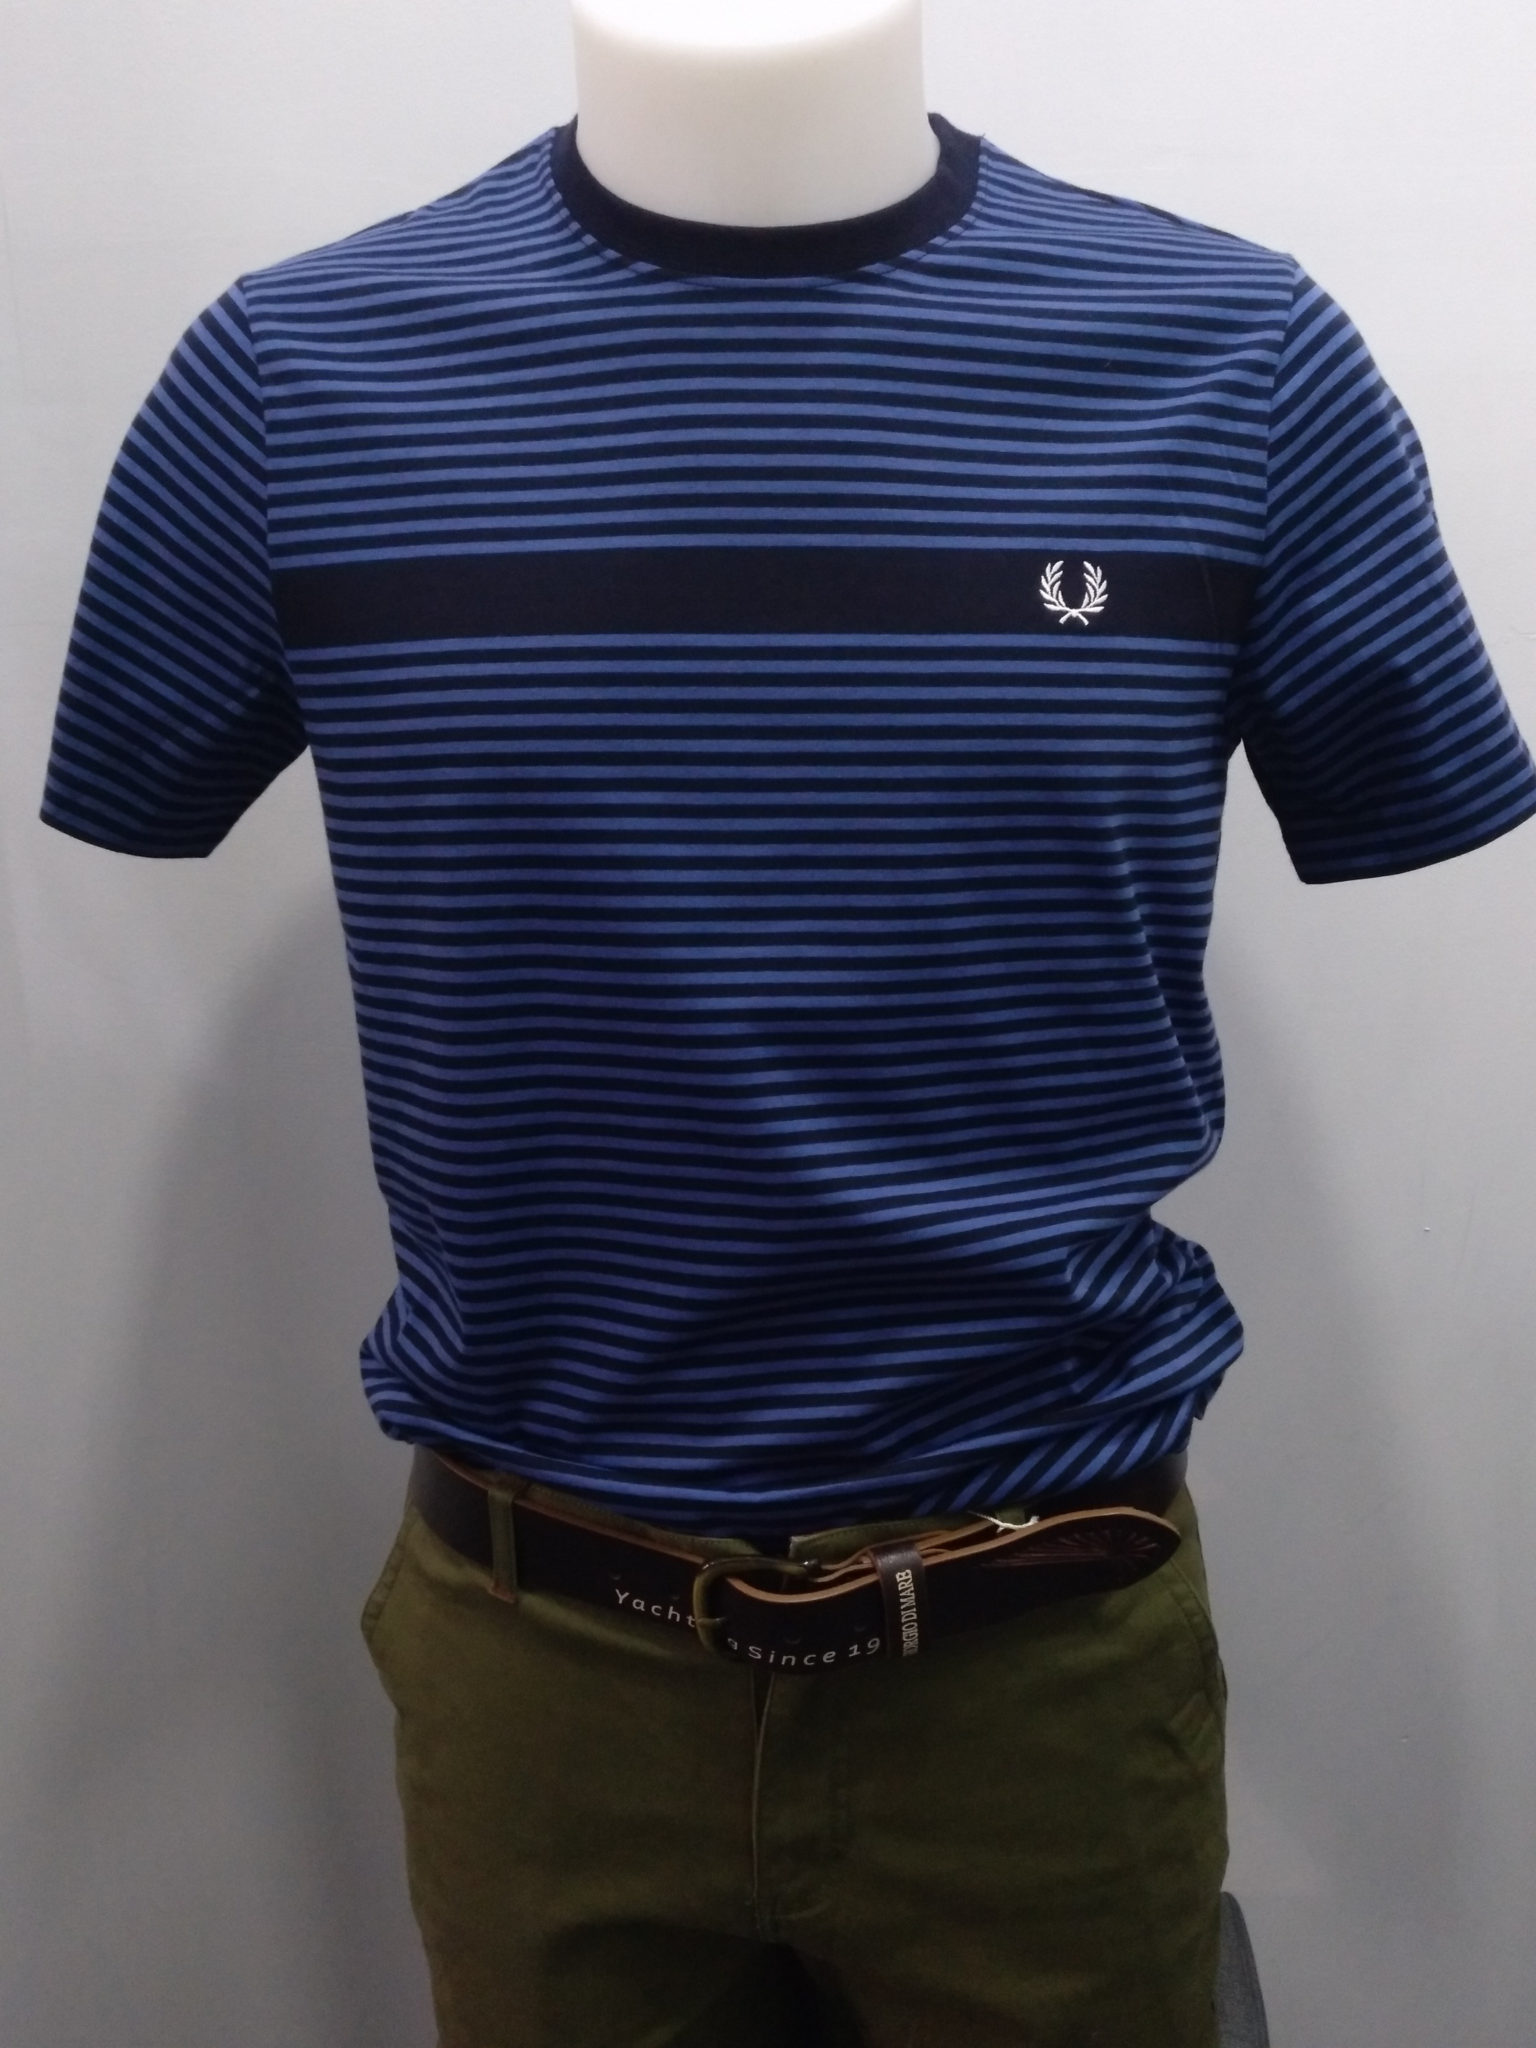 Asser Disco Porra Camiseta fred perry claro oscuro | Geographical Norway